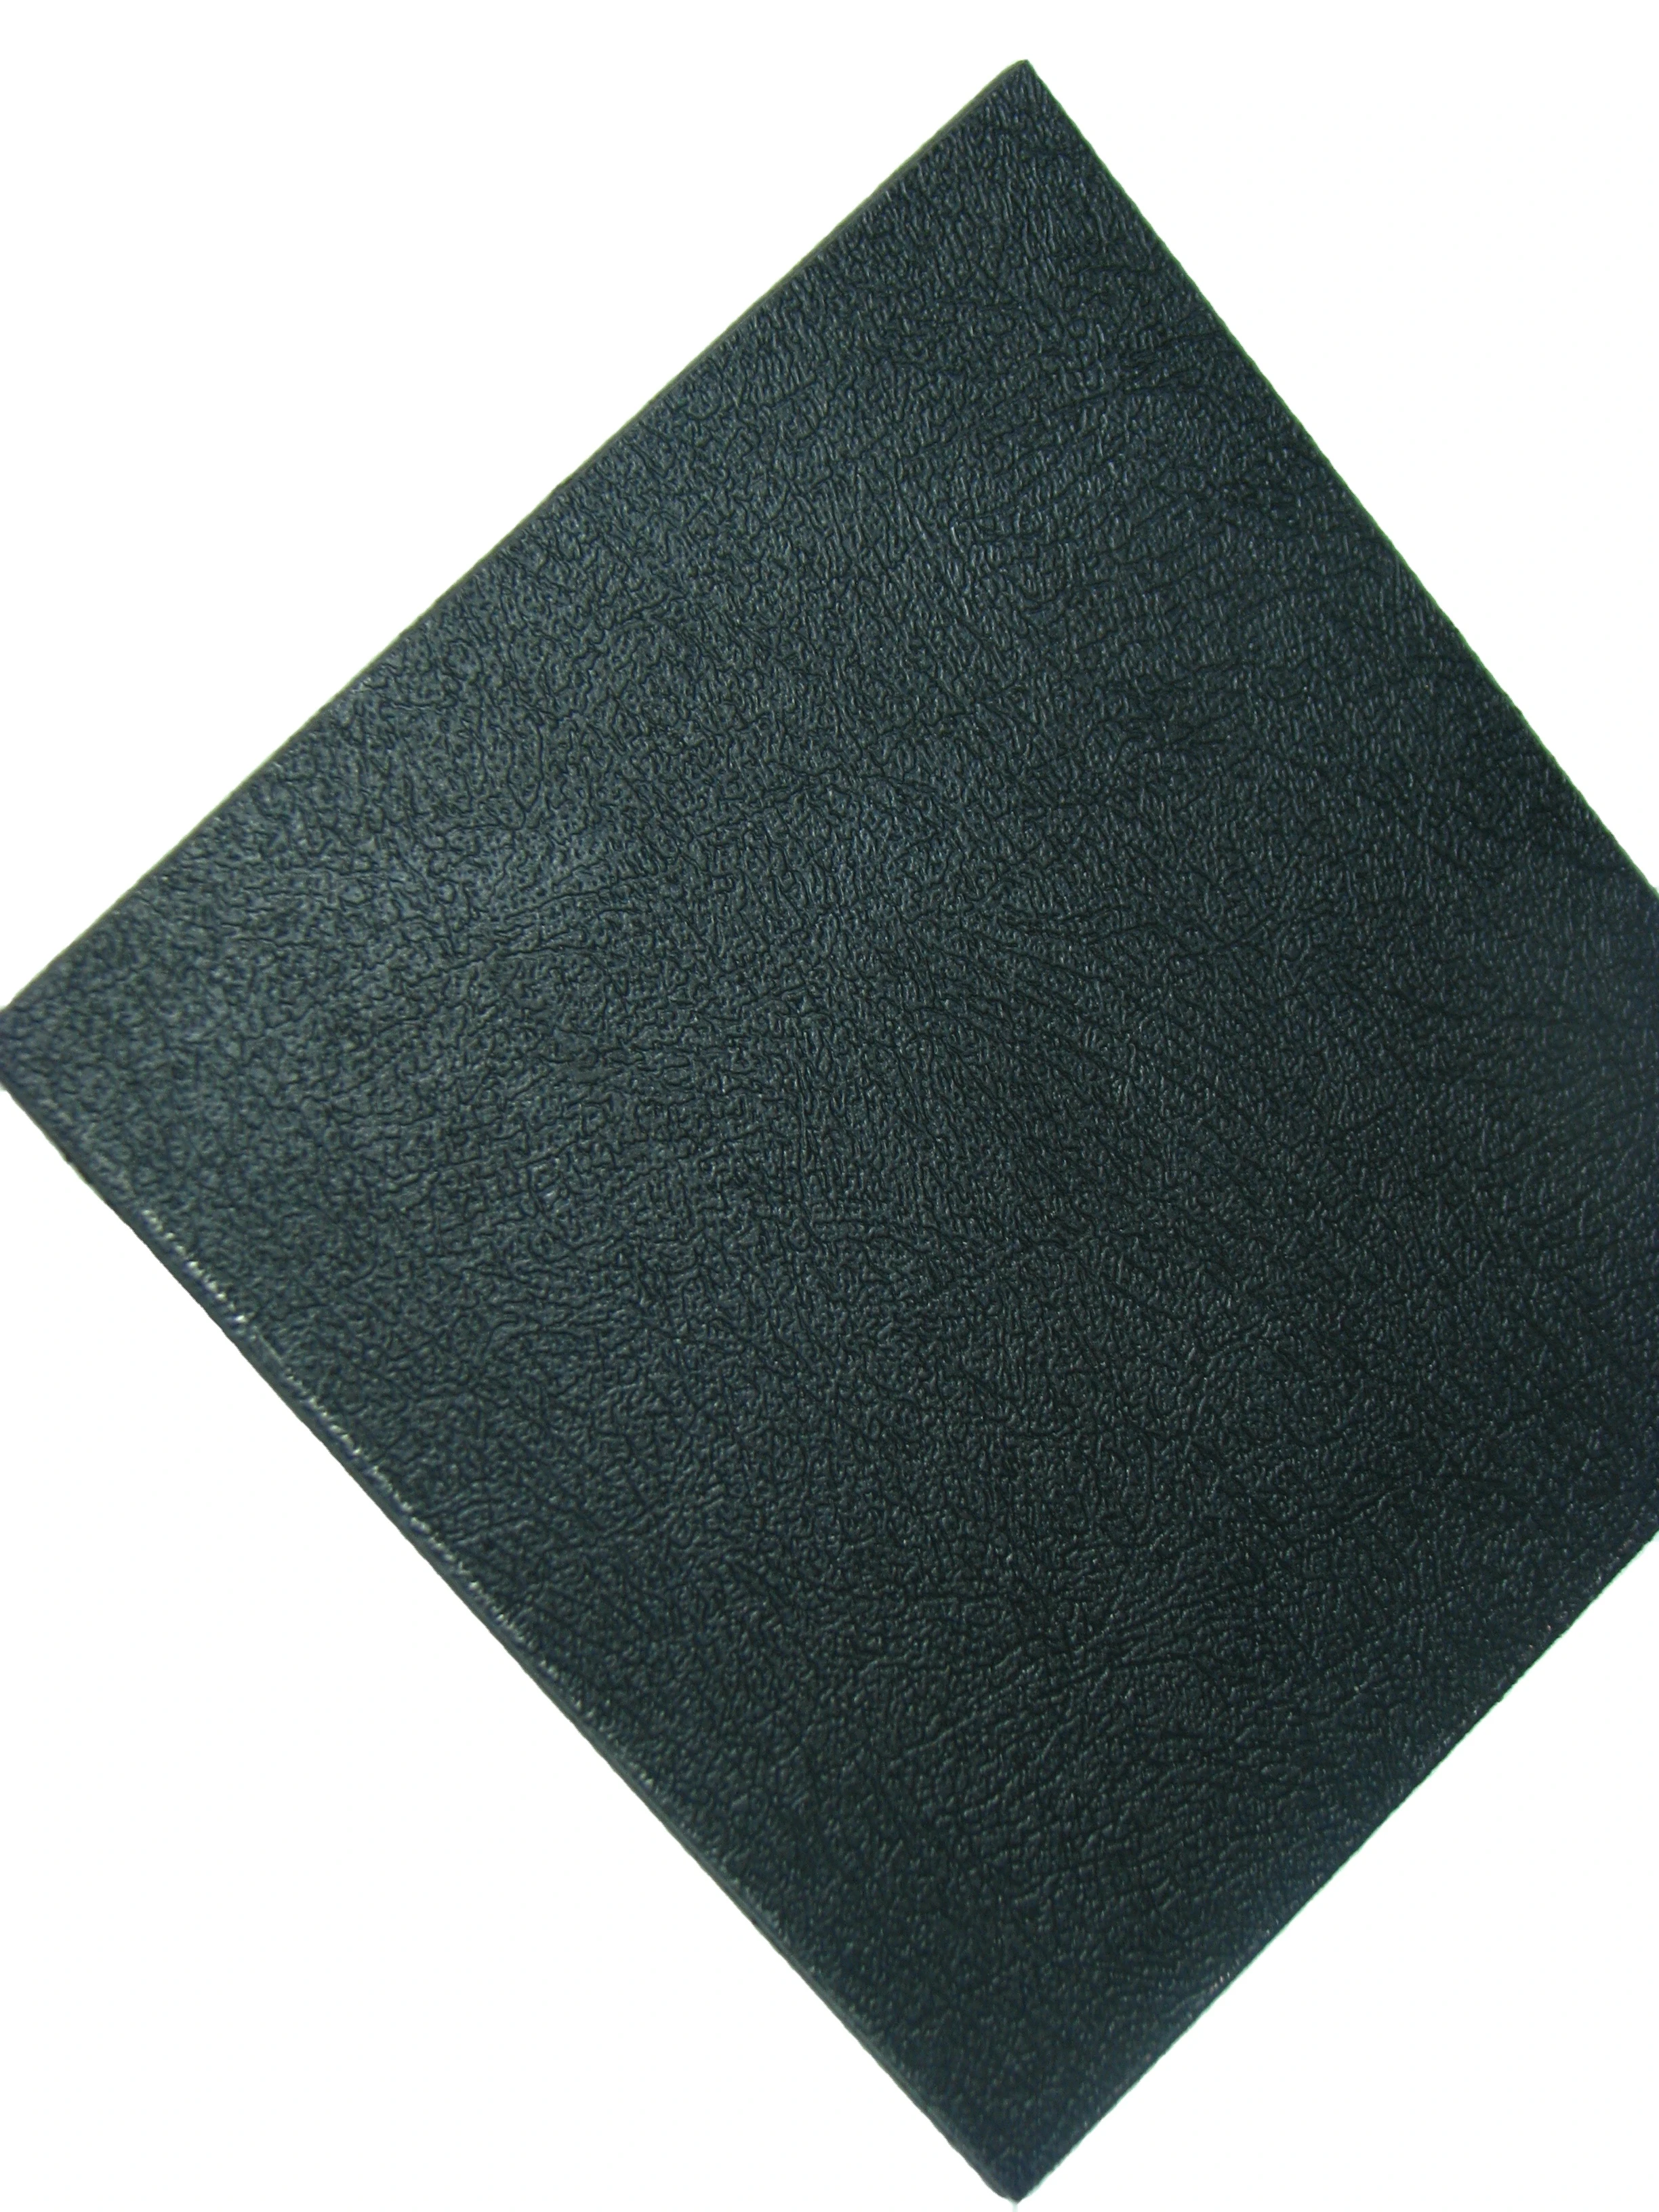 Extrude ABS sheet black plastic sheet with haircell texture general purpose ABS sheet In stock